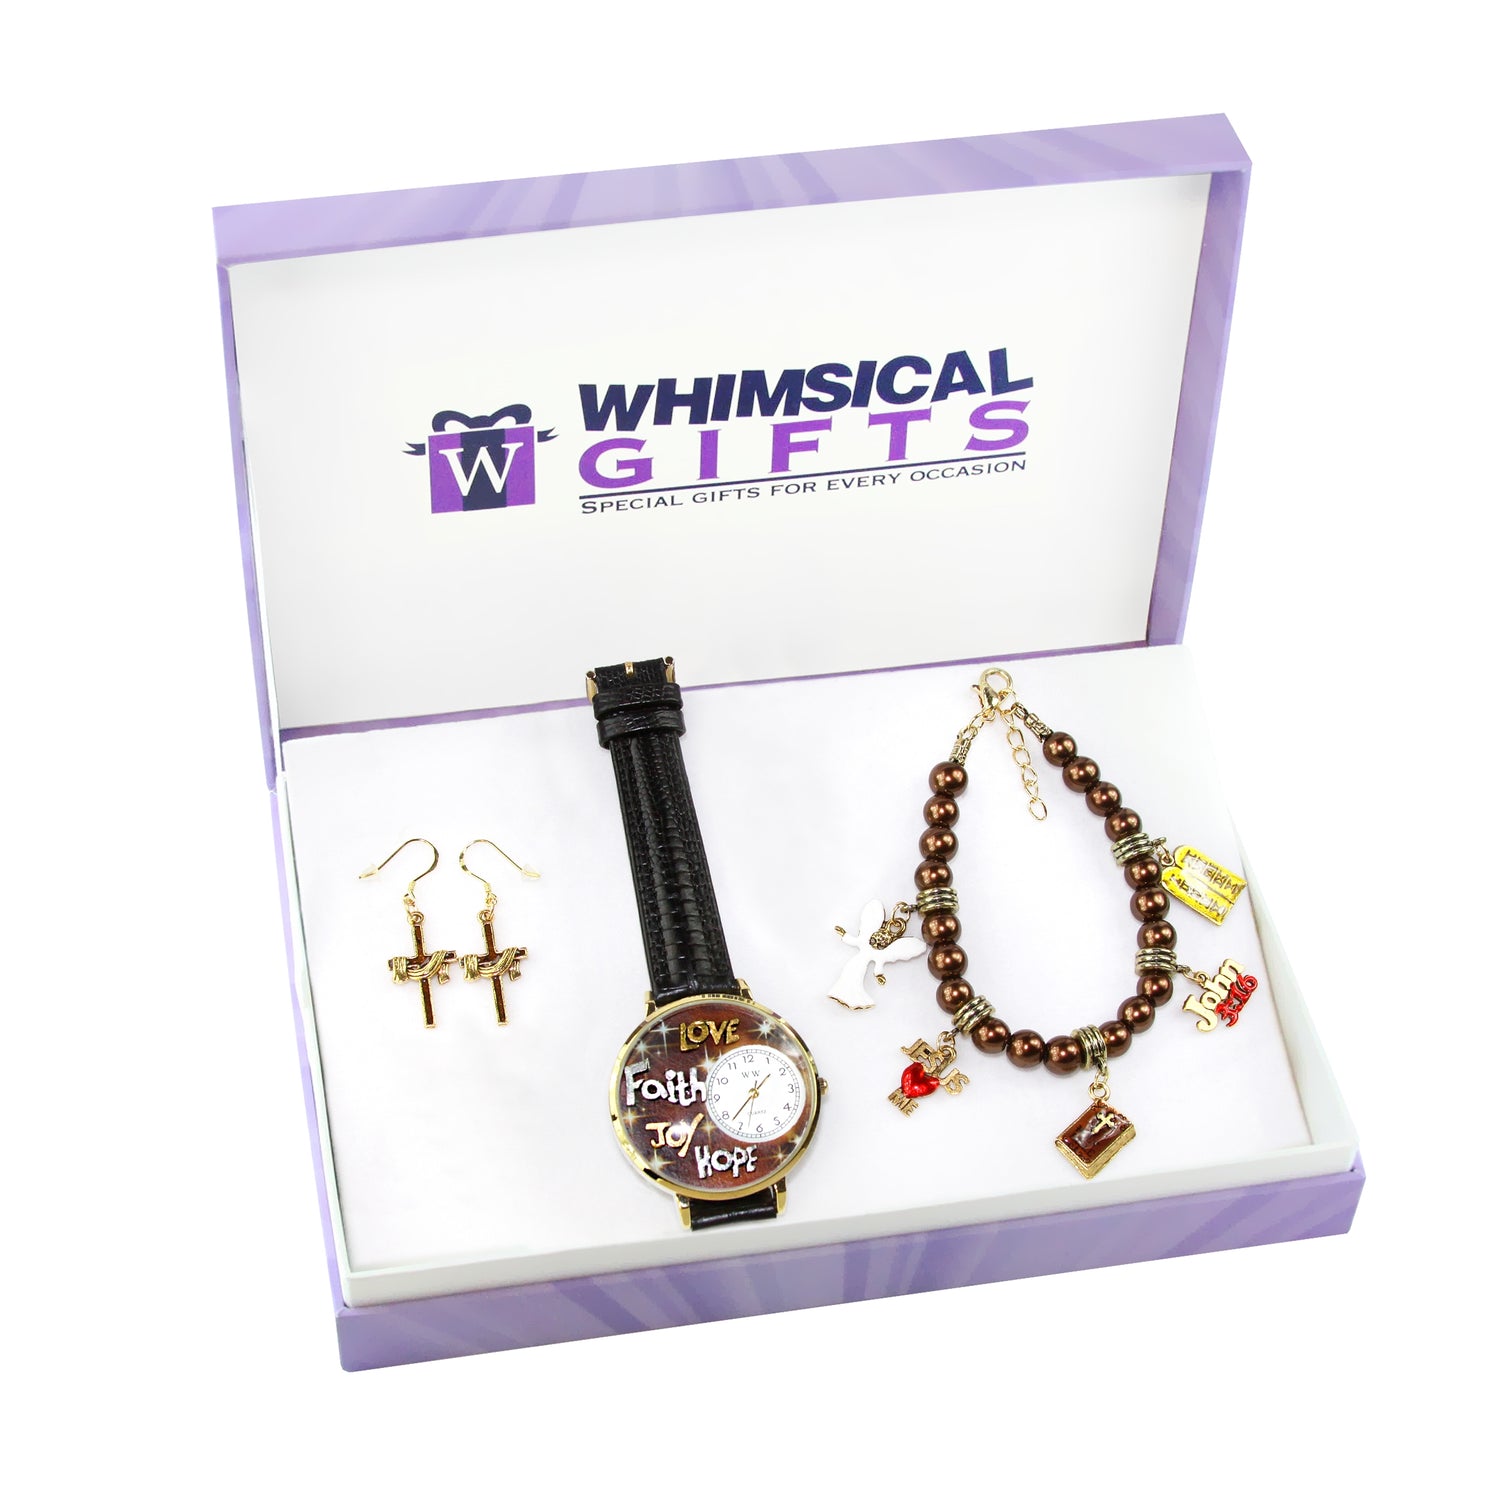 Whimsical Gifts | Religious Watch-Earrings-Bracelet 3 Piece Jewelry Gift Set in Gold Finish | Religious & Spiritual | Jewelry